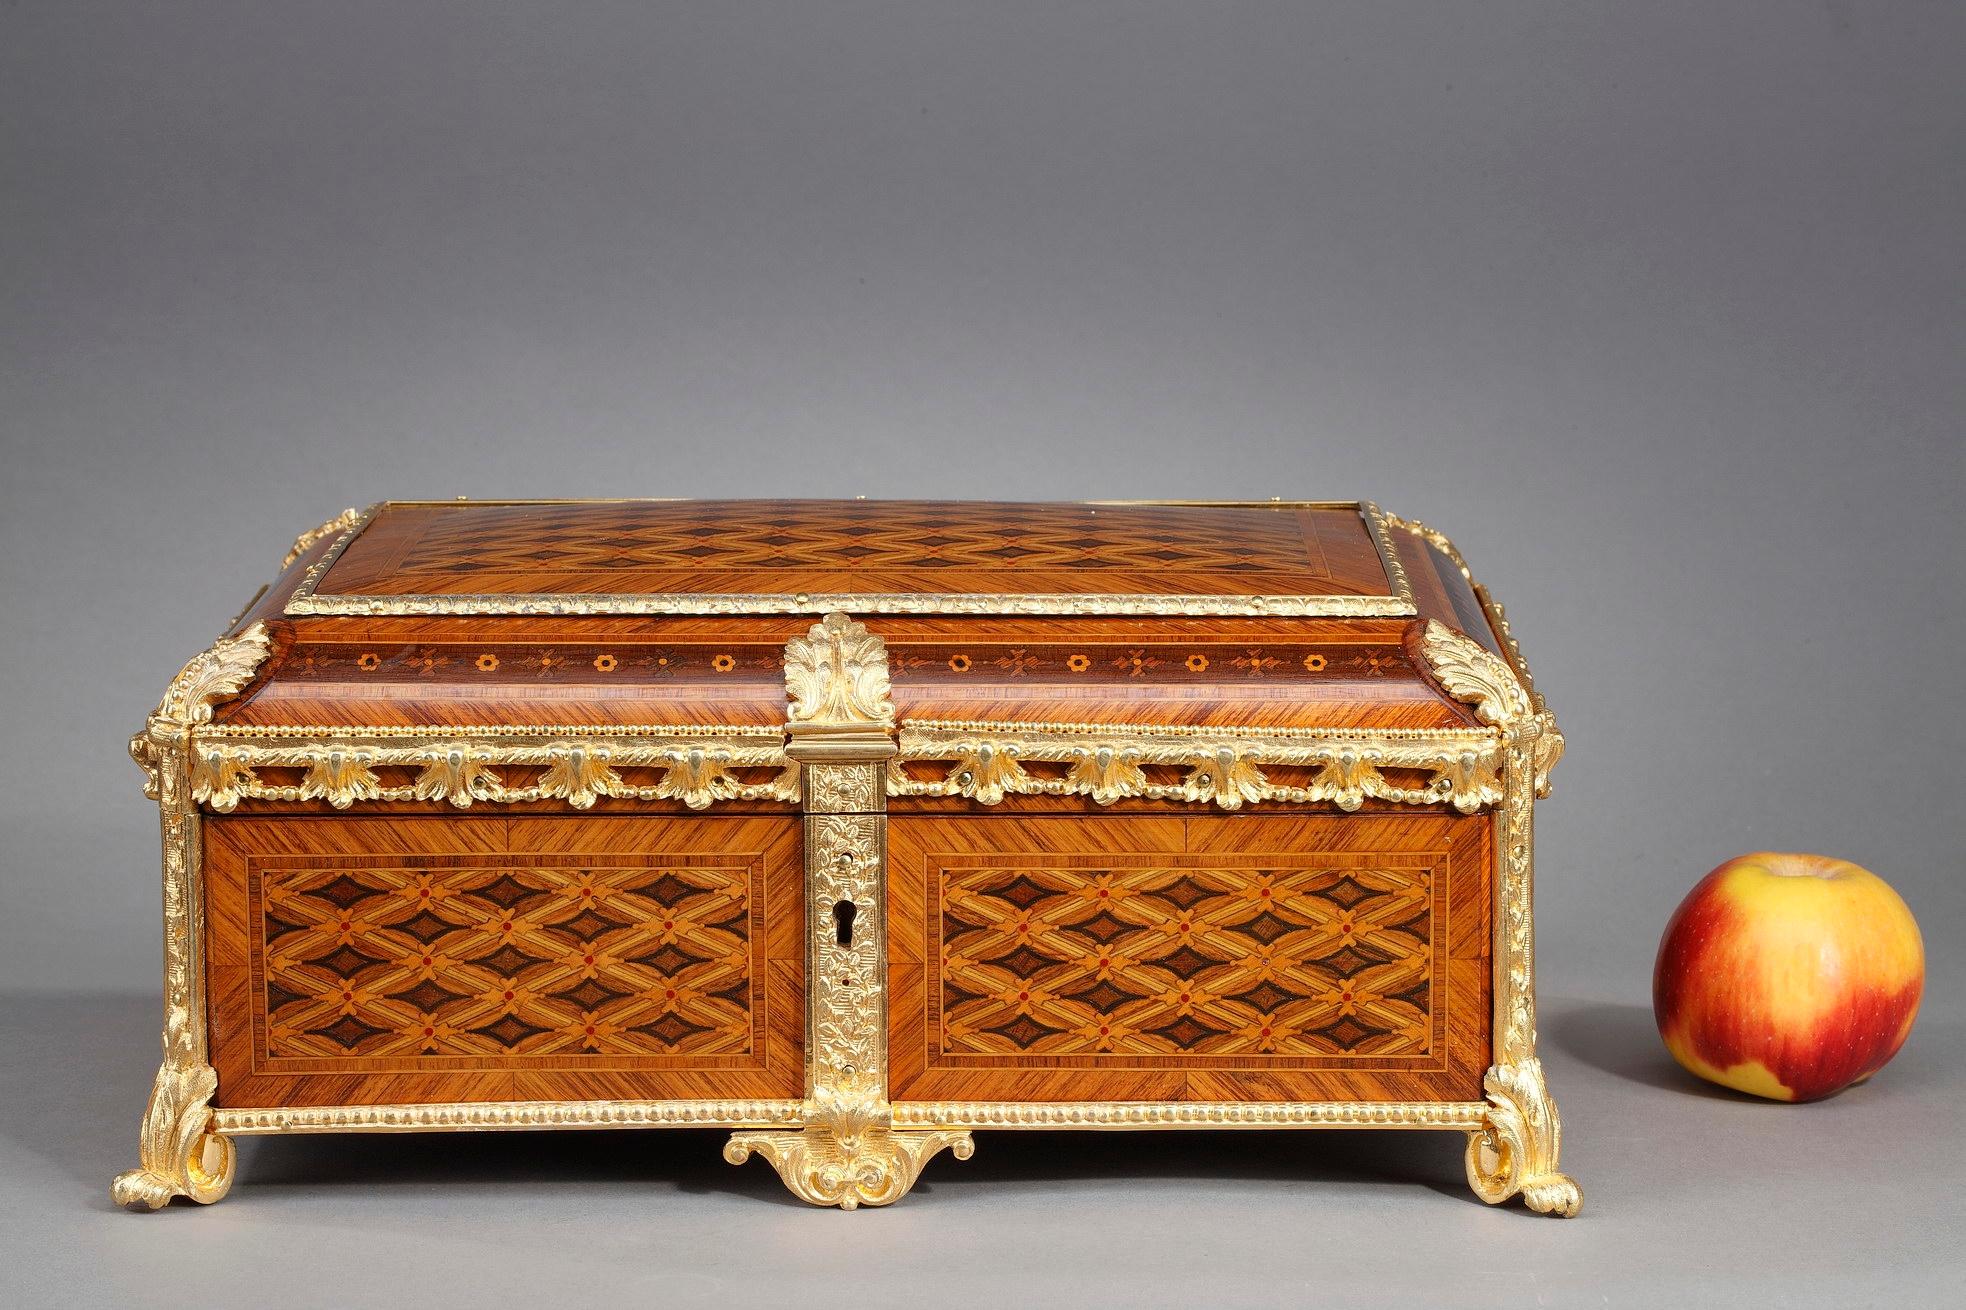 Geometric marquetry pattern and faithful interpretation of the Louis XVI style characterize this 19th-century French jewelry box. Enfolded in intricate marquetry featuring diamond pattern, the casket is mounted in gilt bronze, chiseled with delicate